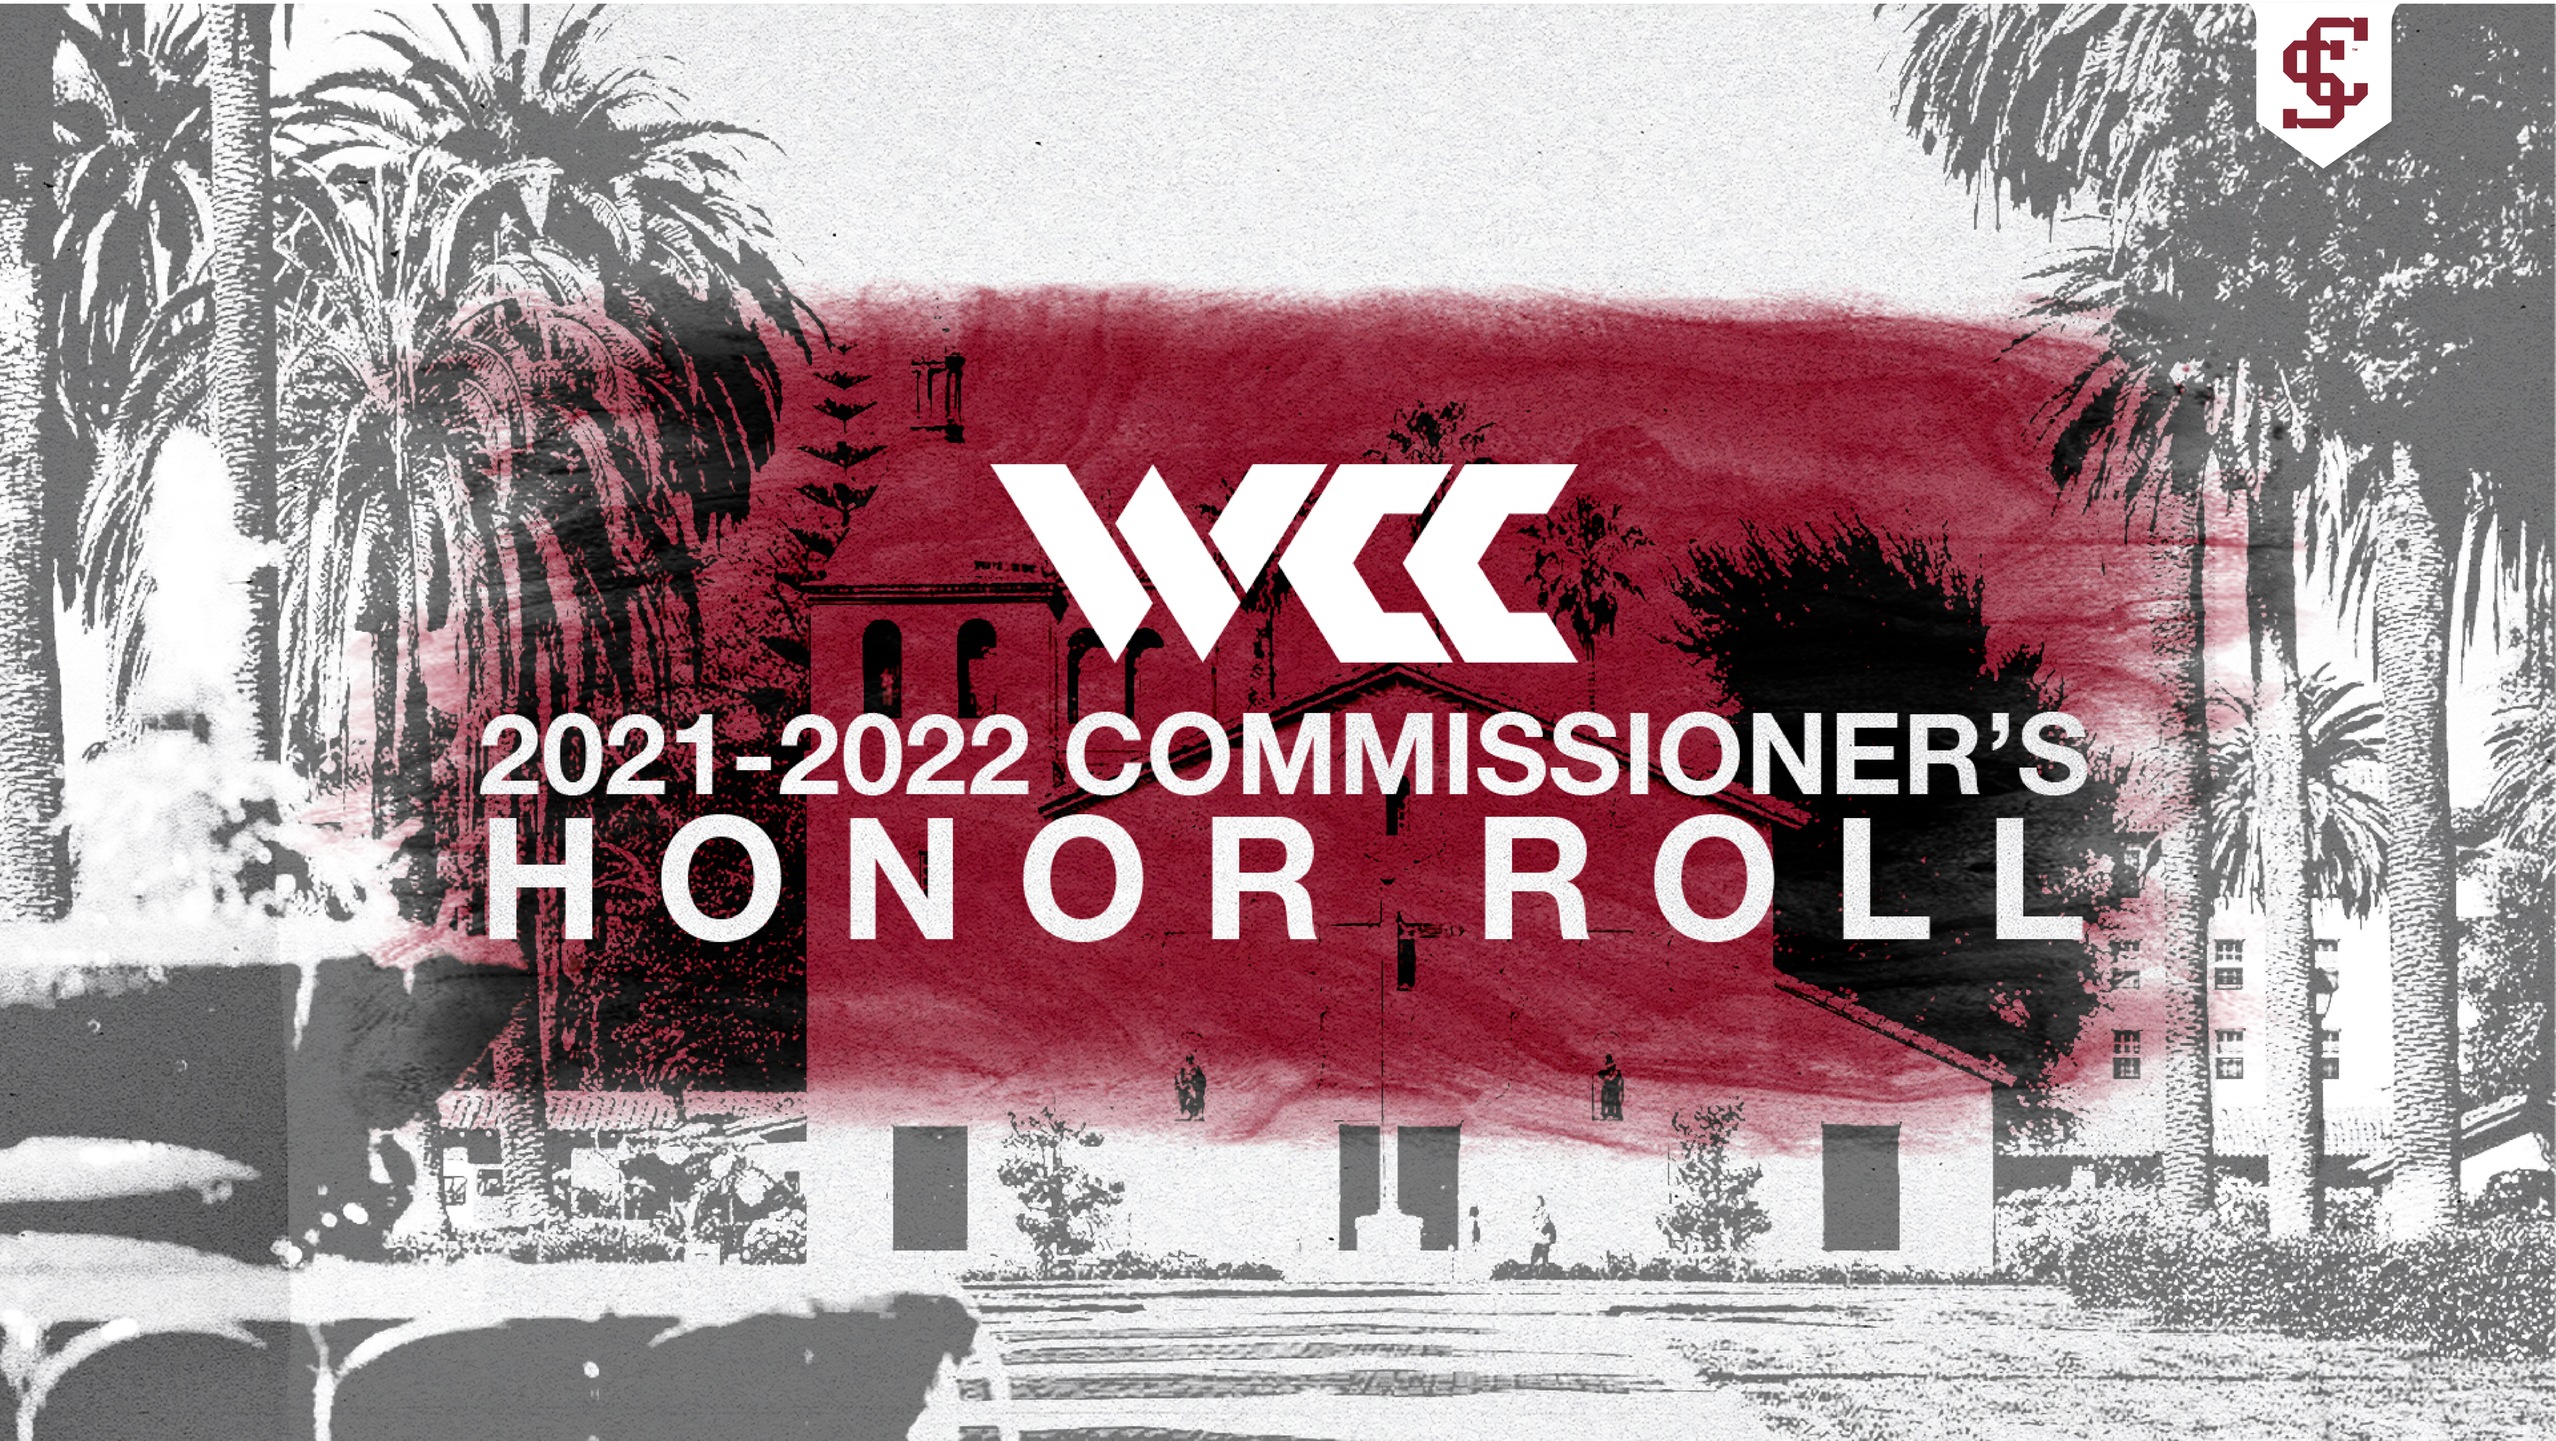 Broncos Recognized on WCC Commissioner's Honor Roll